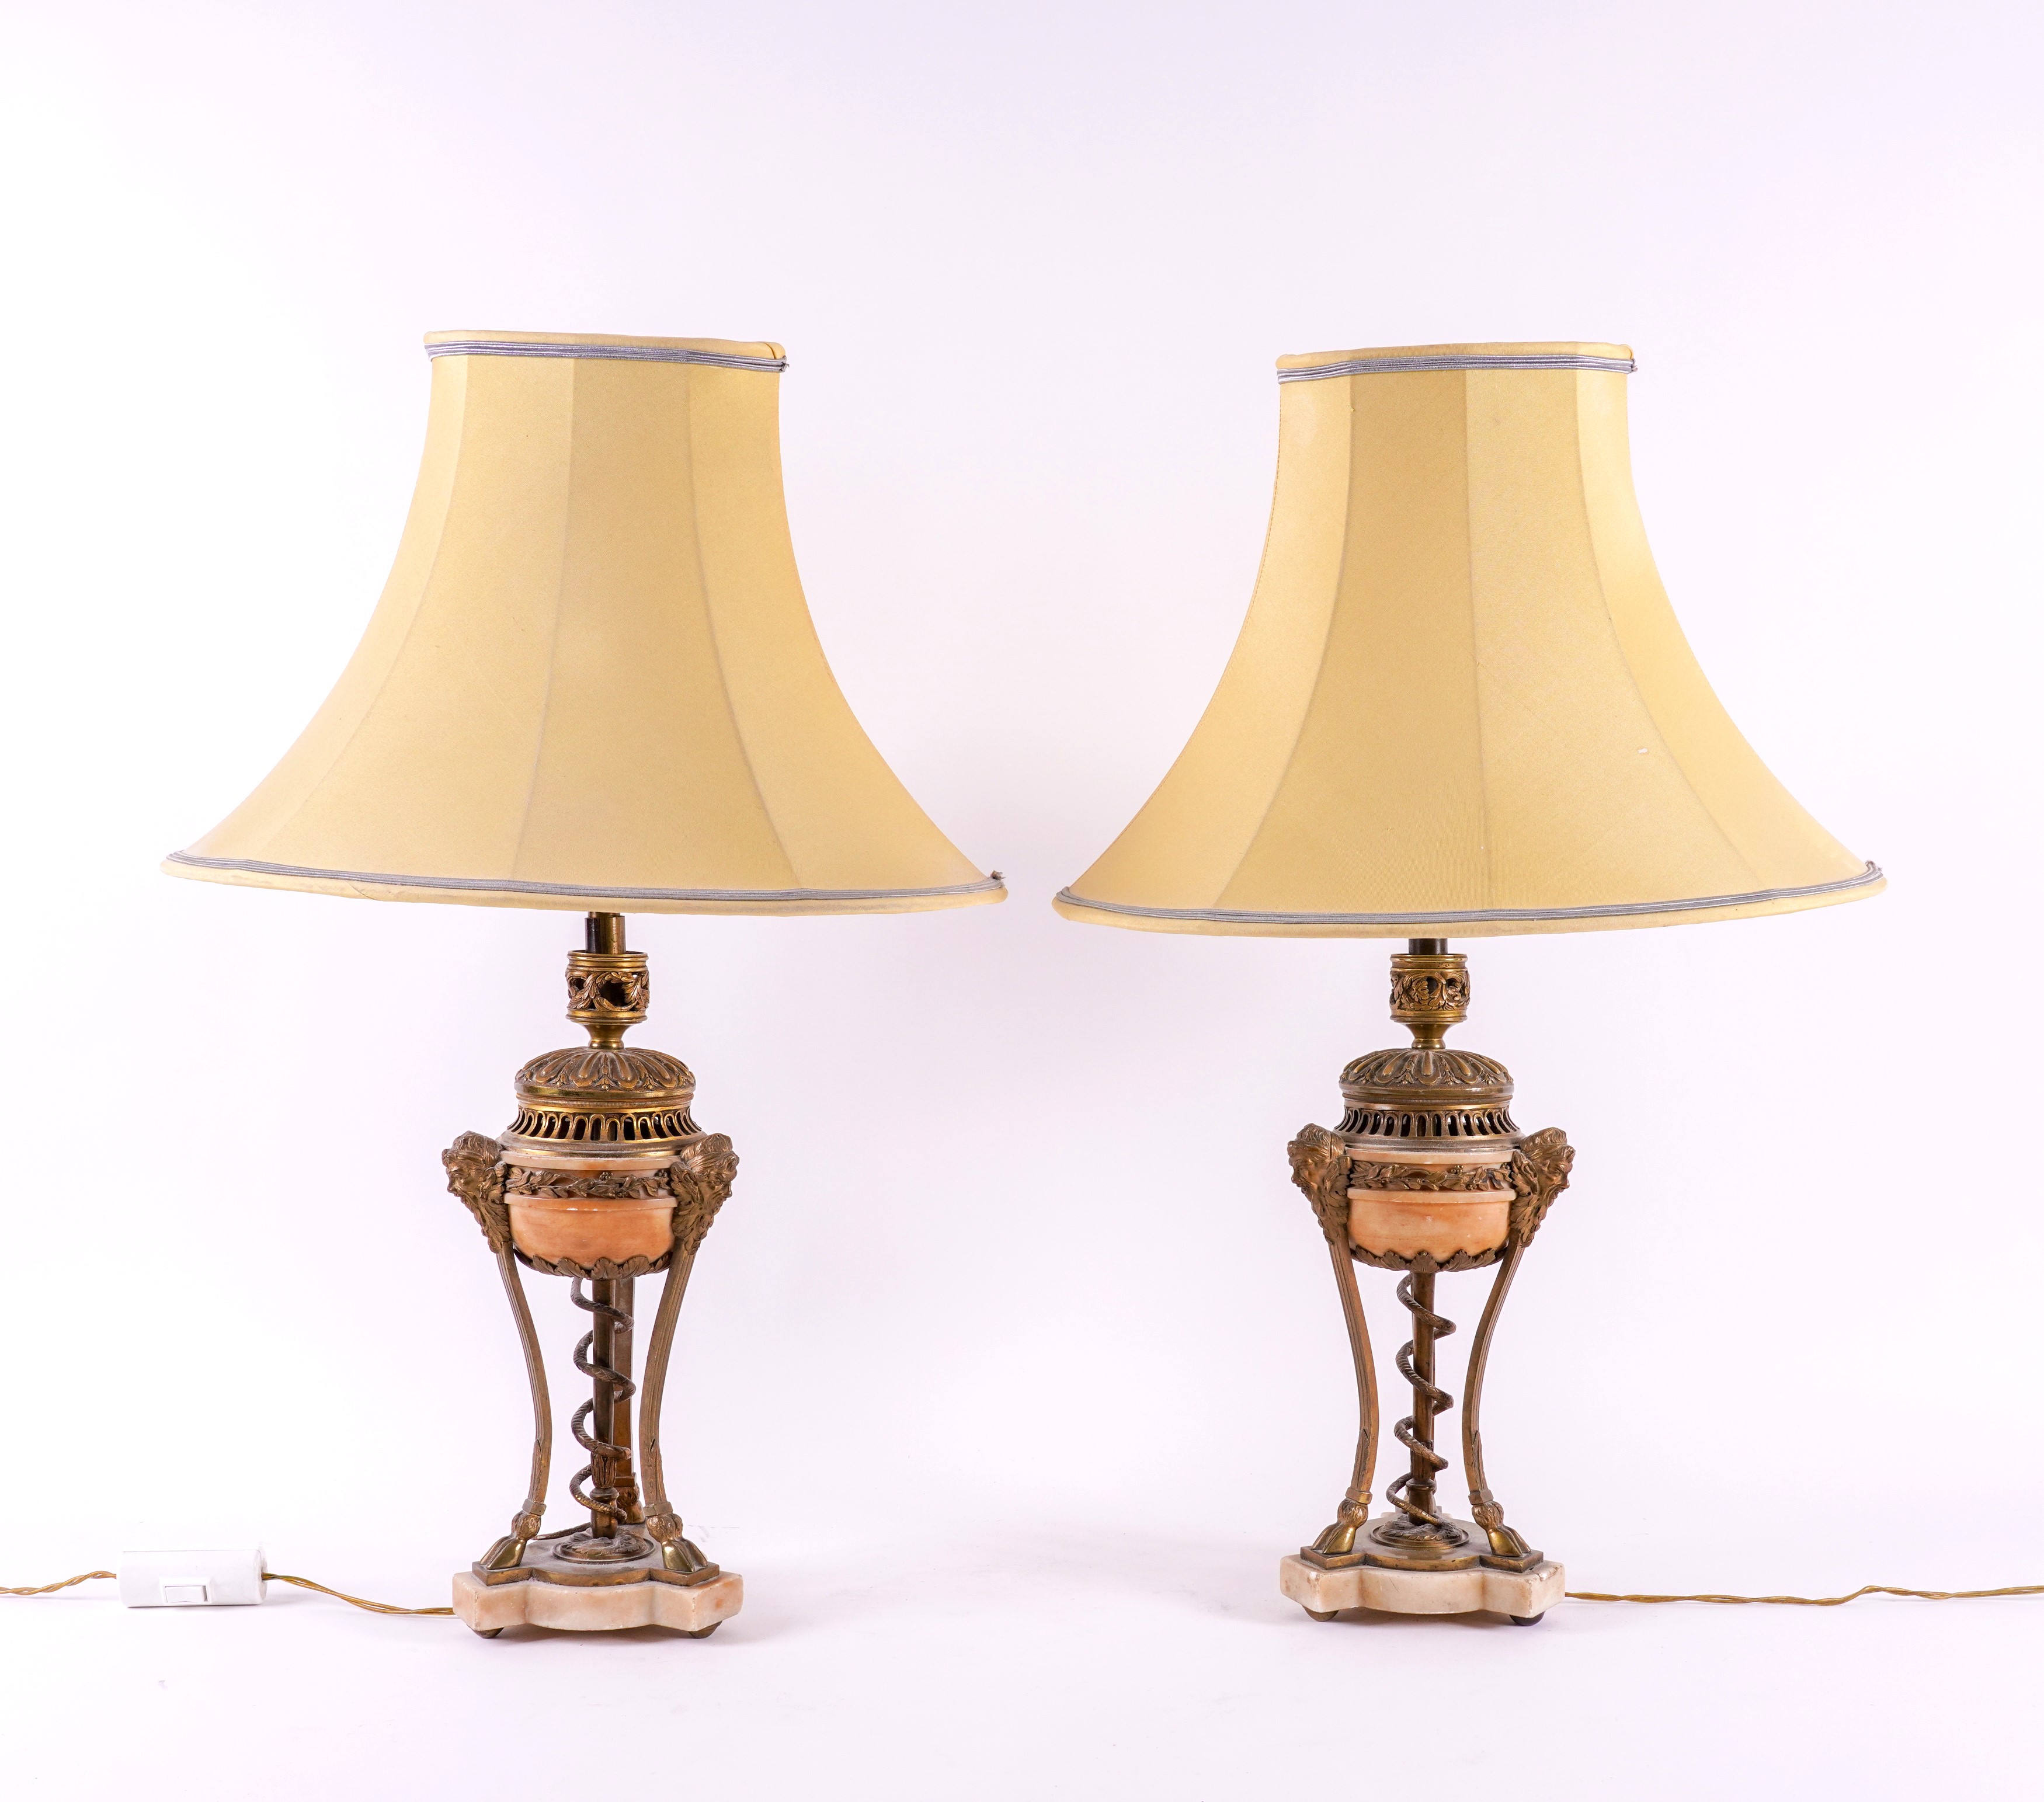 A PAIR OF LOUIS XVI STYLE GILT-METAL MOUNTED ALABASTER ANTHENIENNE TABLE LAMPS (2)